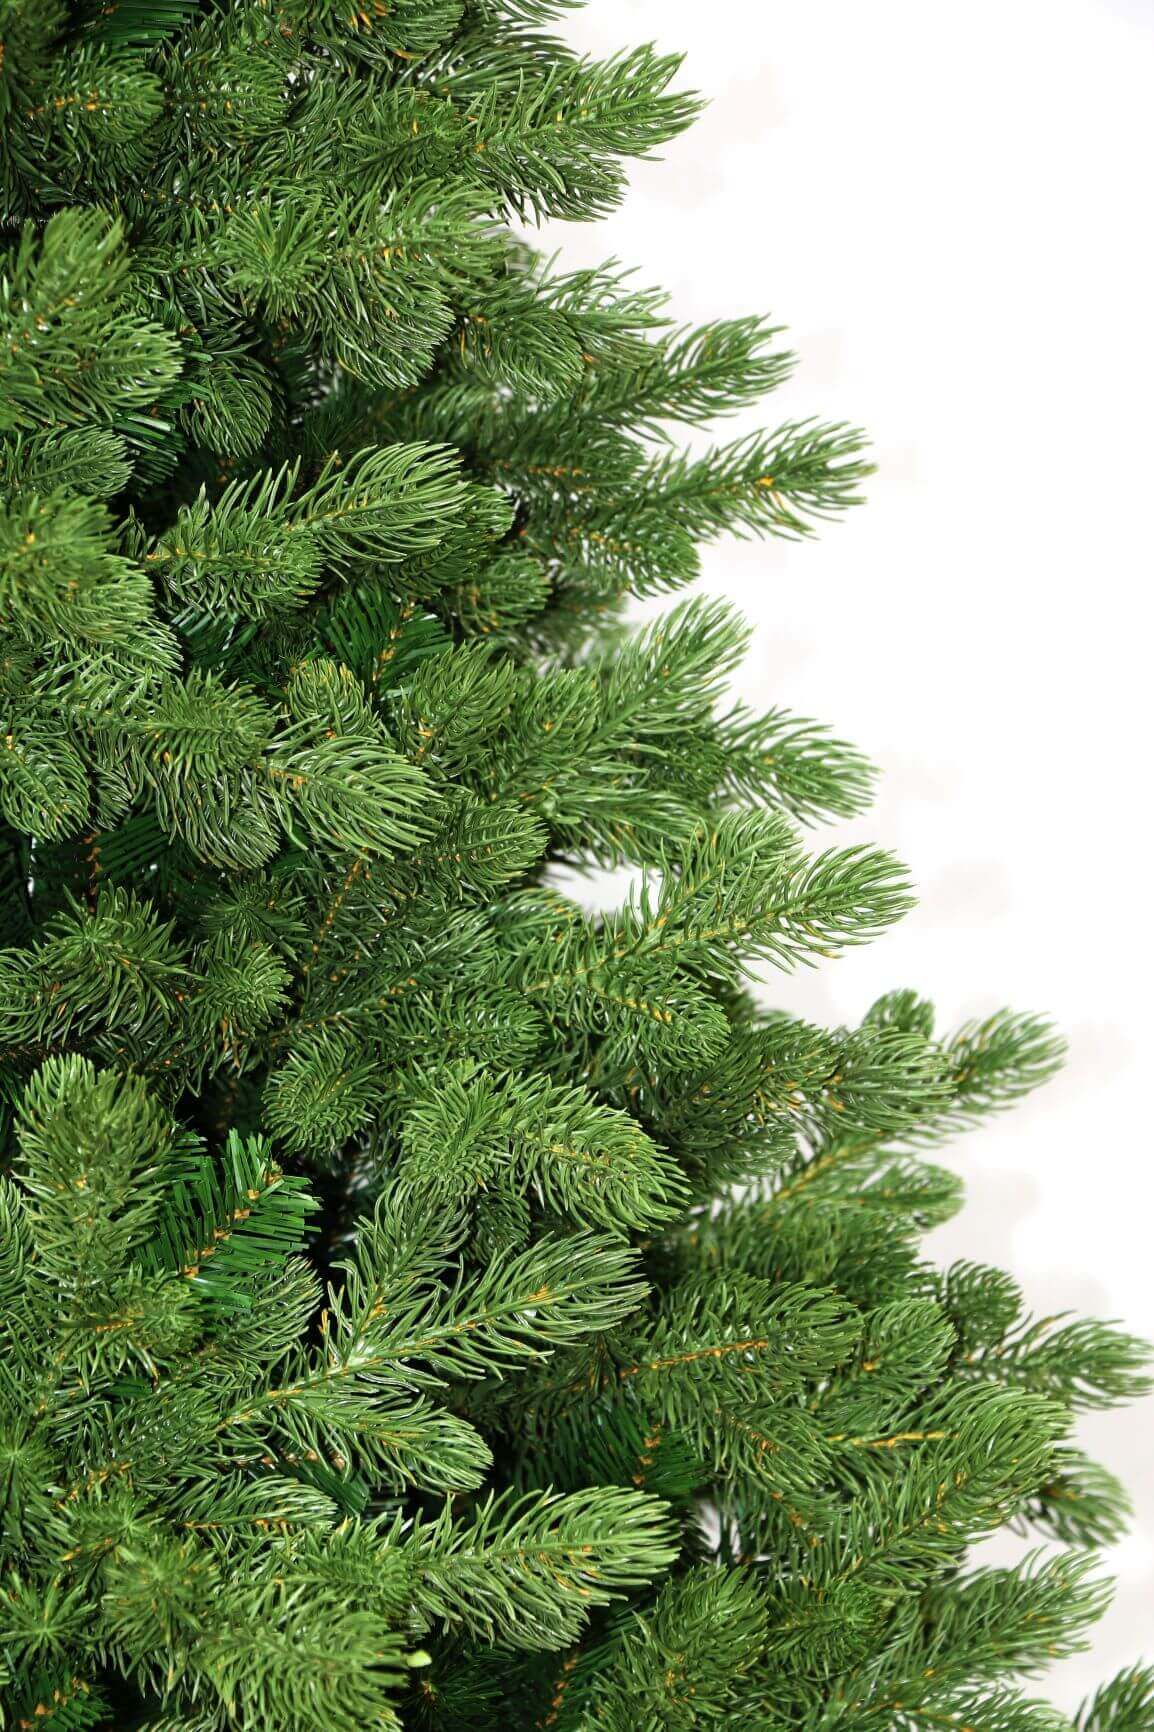 King of Christmas 9' Cypress Spruce Quick-Shape Artificial Christmas Tree with 2050 Warm White & Multi-Color LED Lights